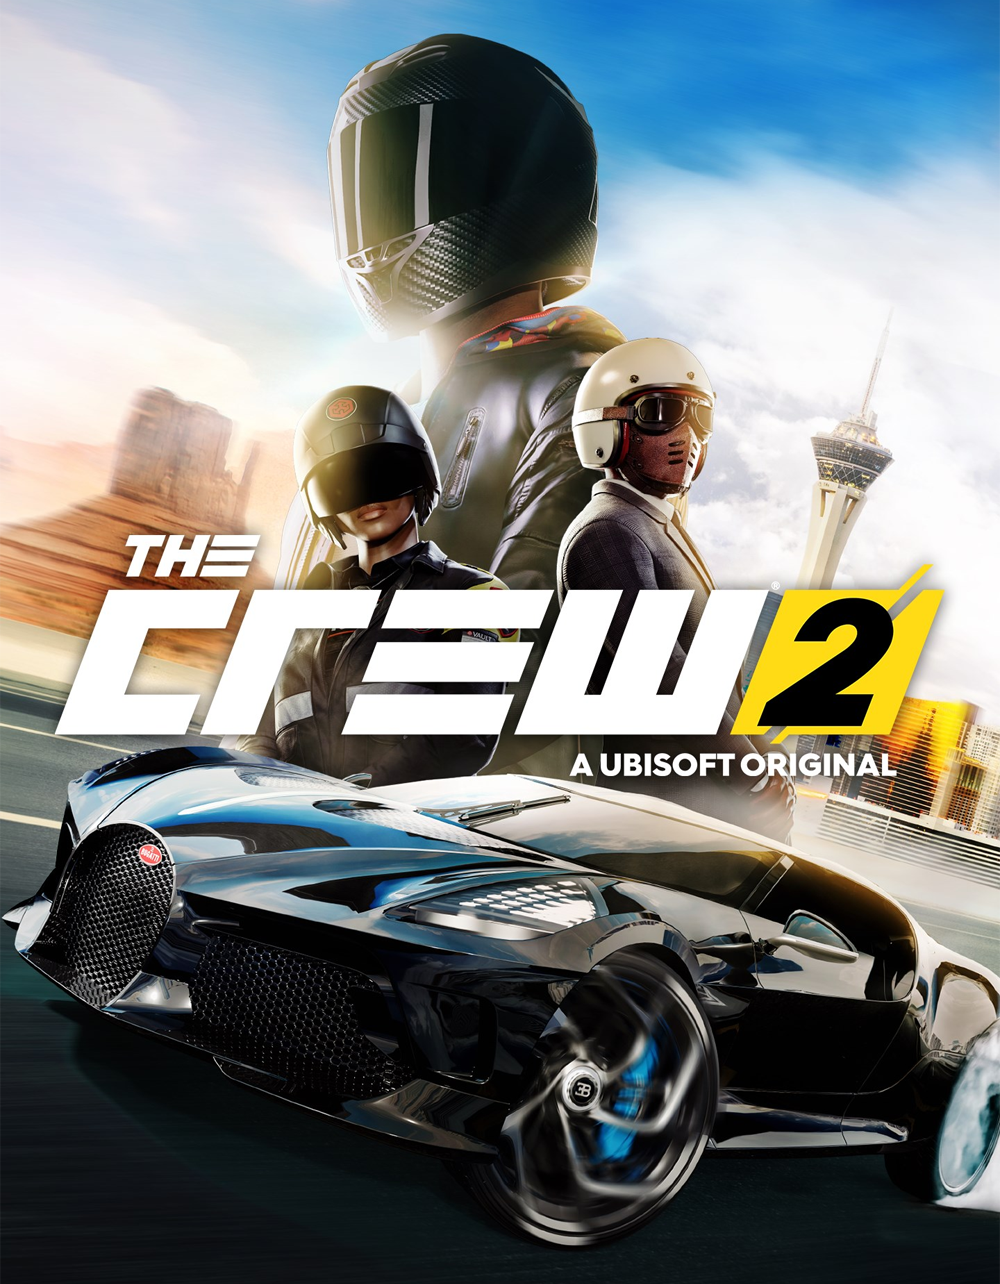 Metacritic - THE CREW 2 reviews are in - they're mostly